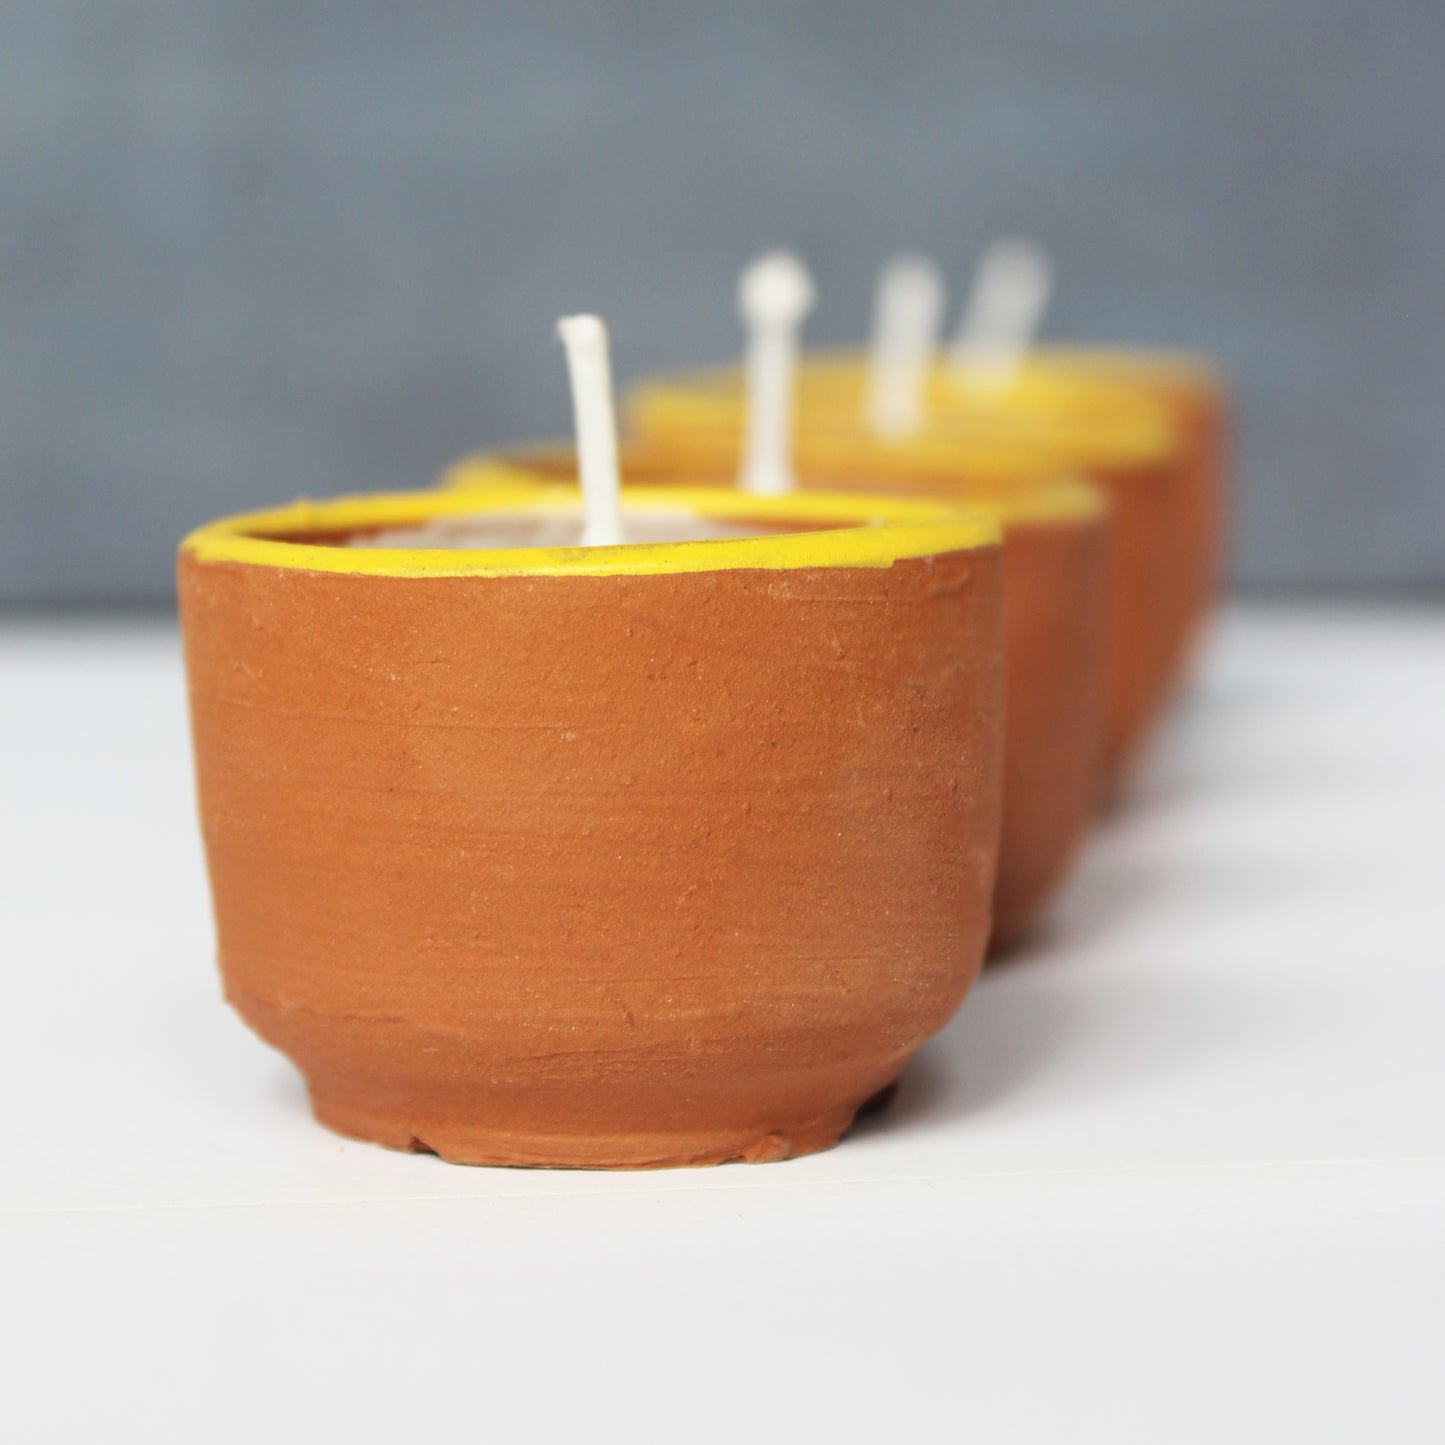 Handcrafted Terracotta "CUP" Candles Set of 12